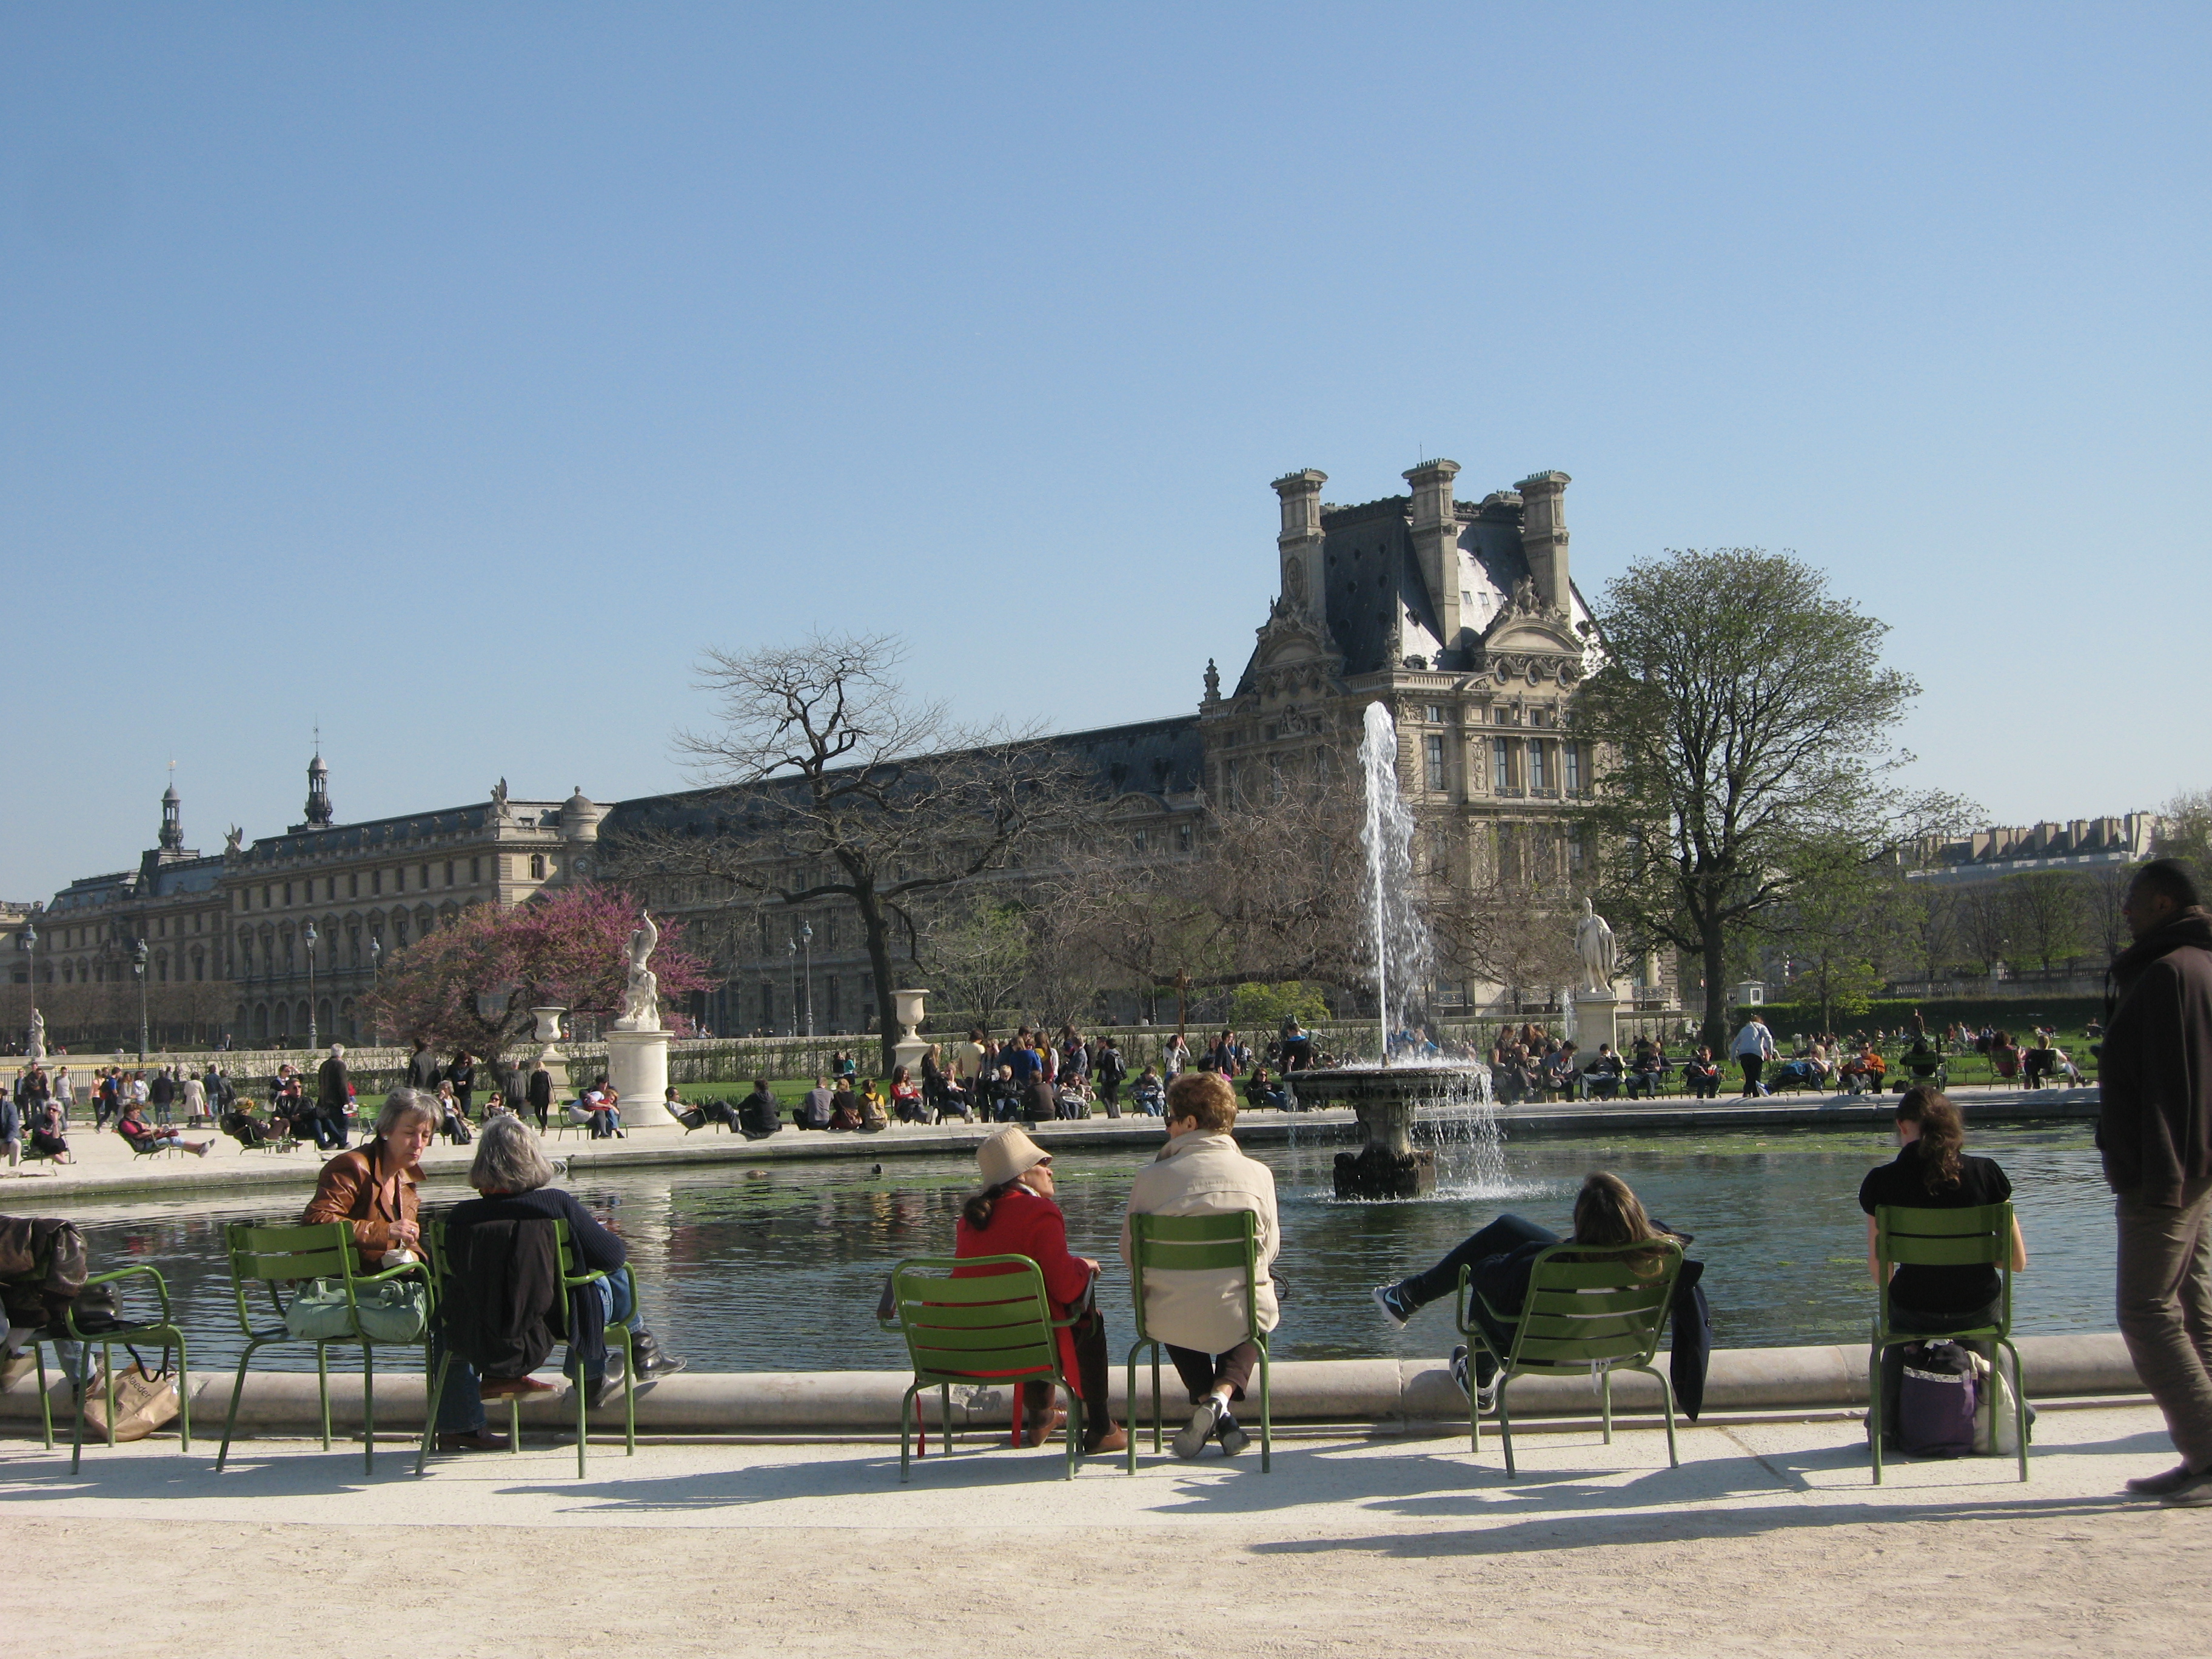 The edge of the Tuileries with the Louvre in the background. Photo by me.